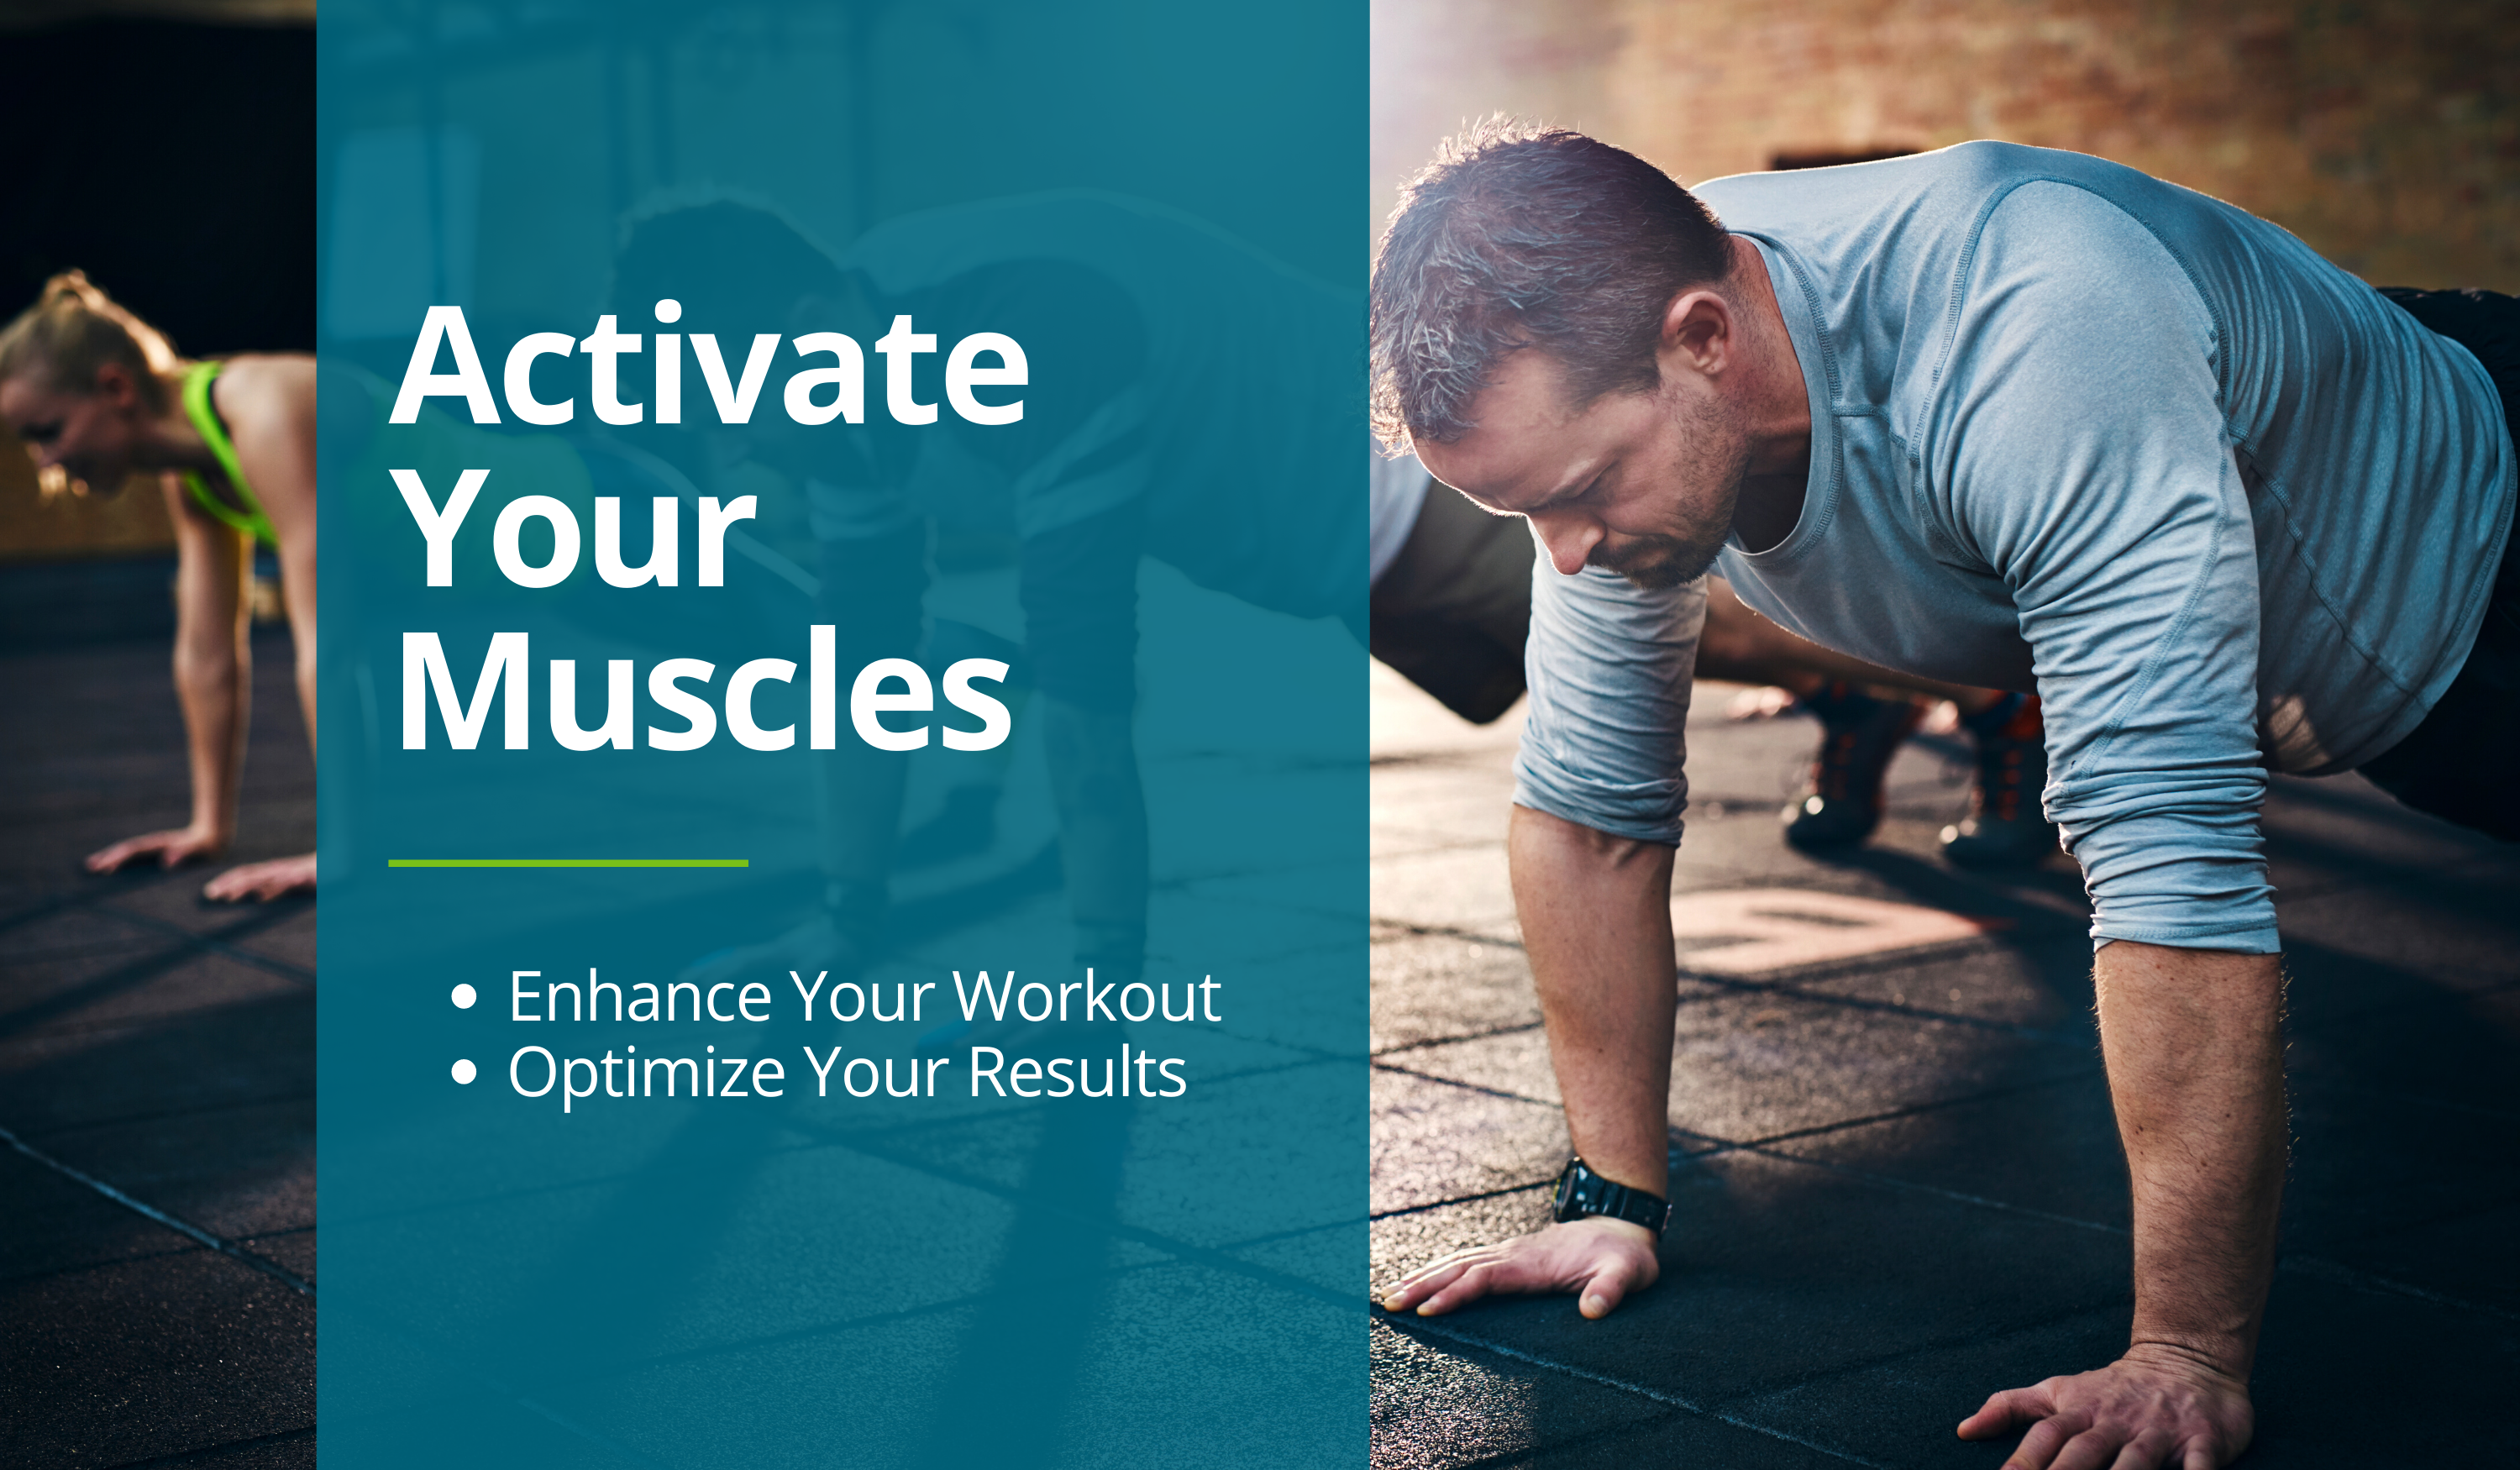 5 Exercises to Activate Your Muscles and Improve Your Workout